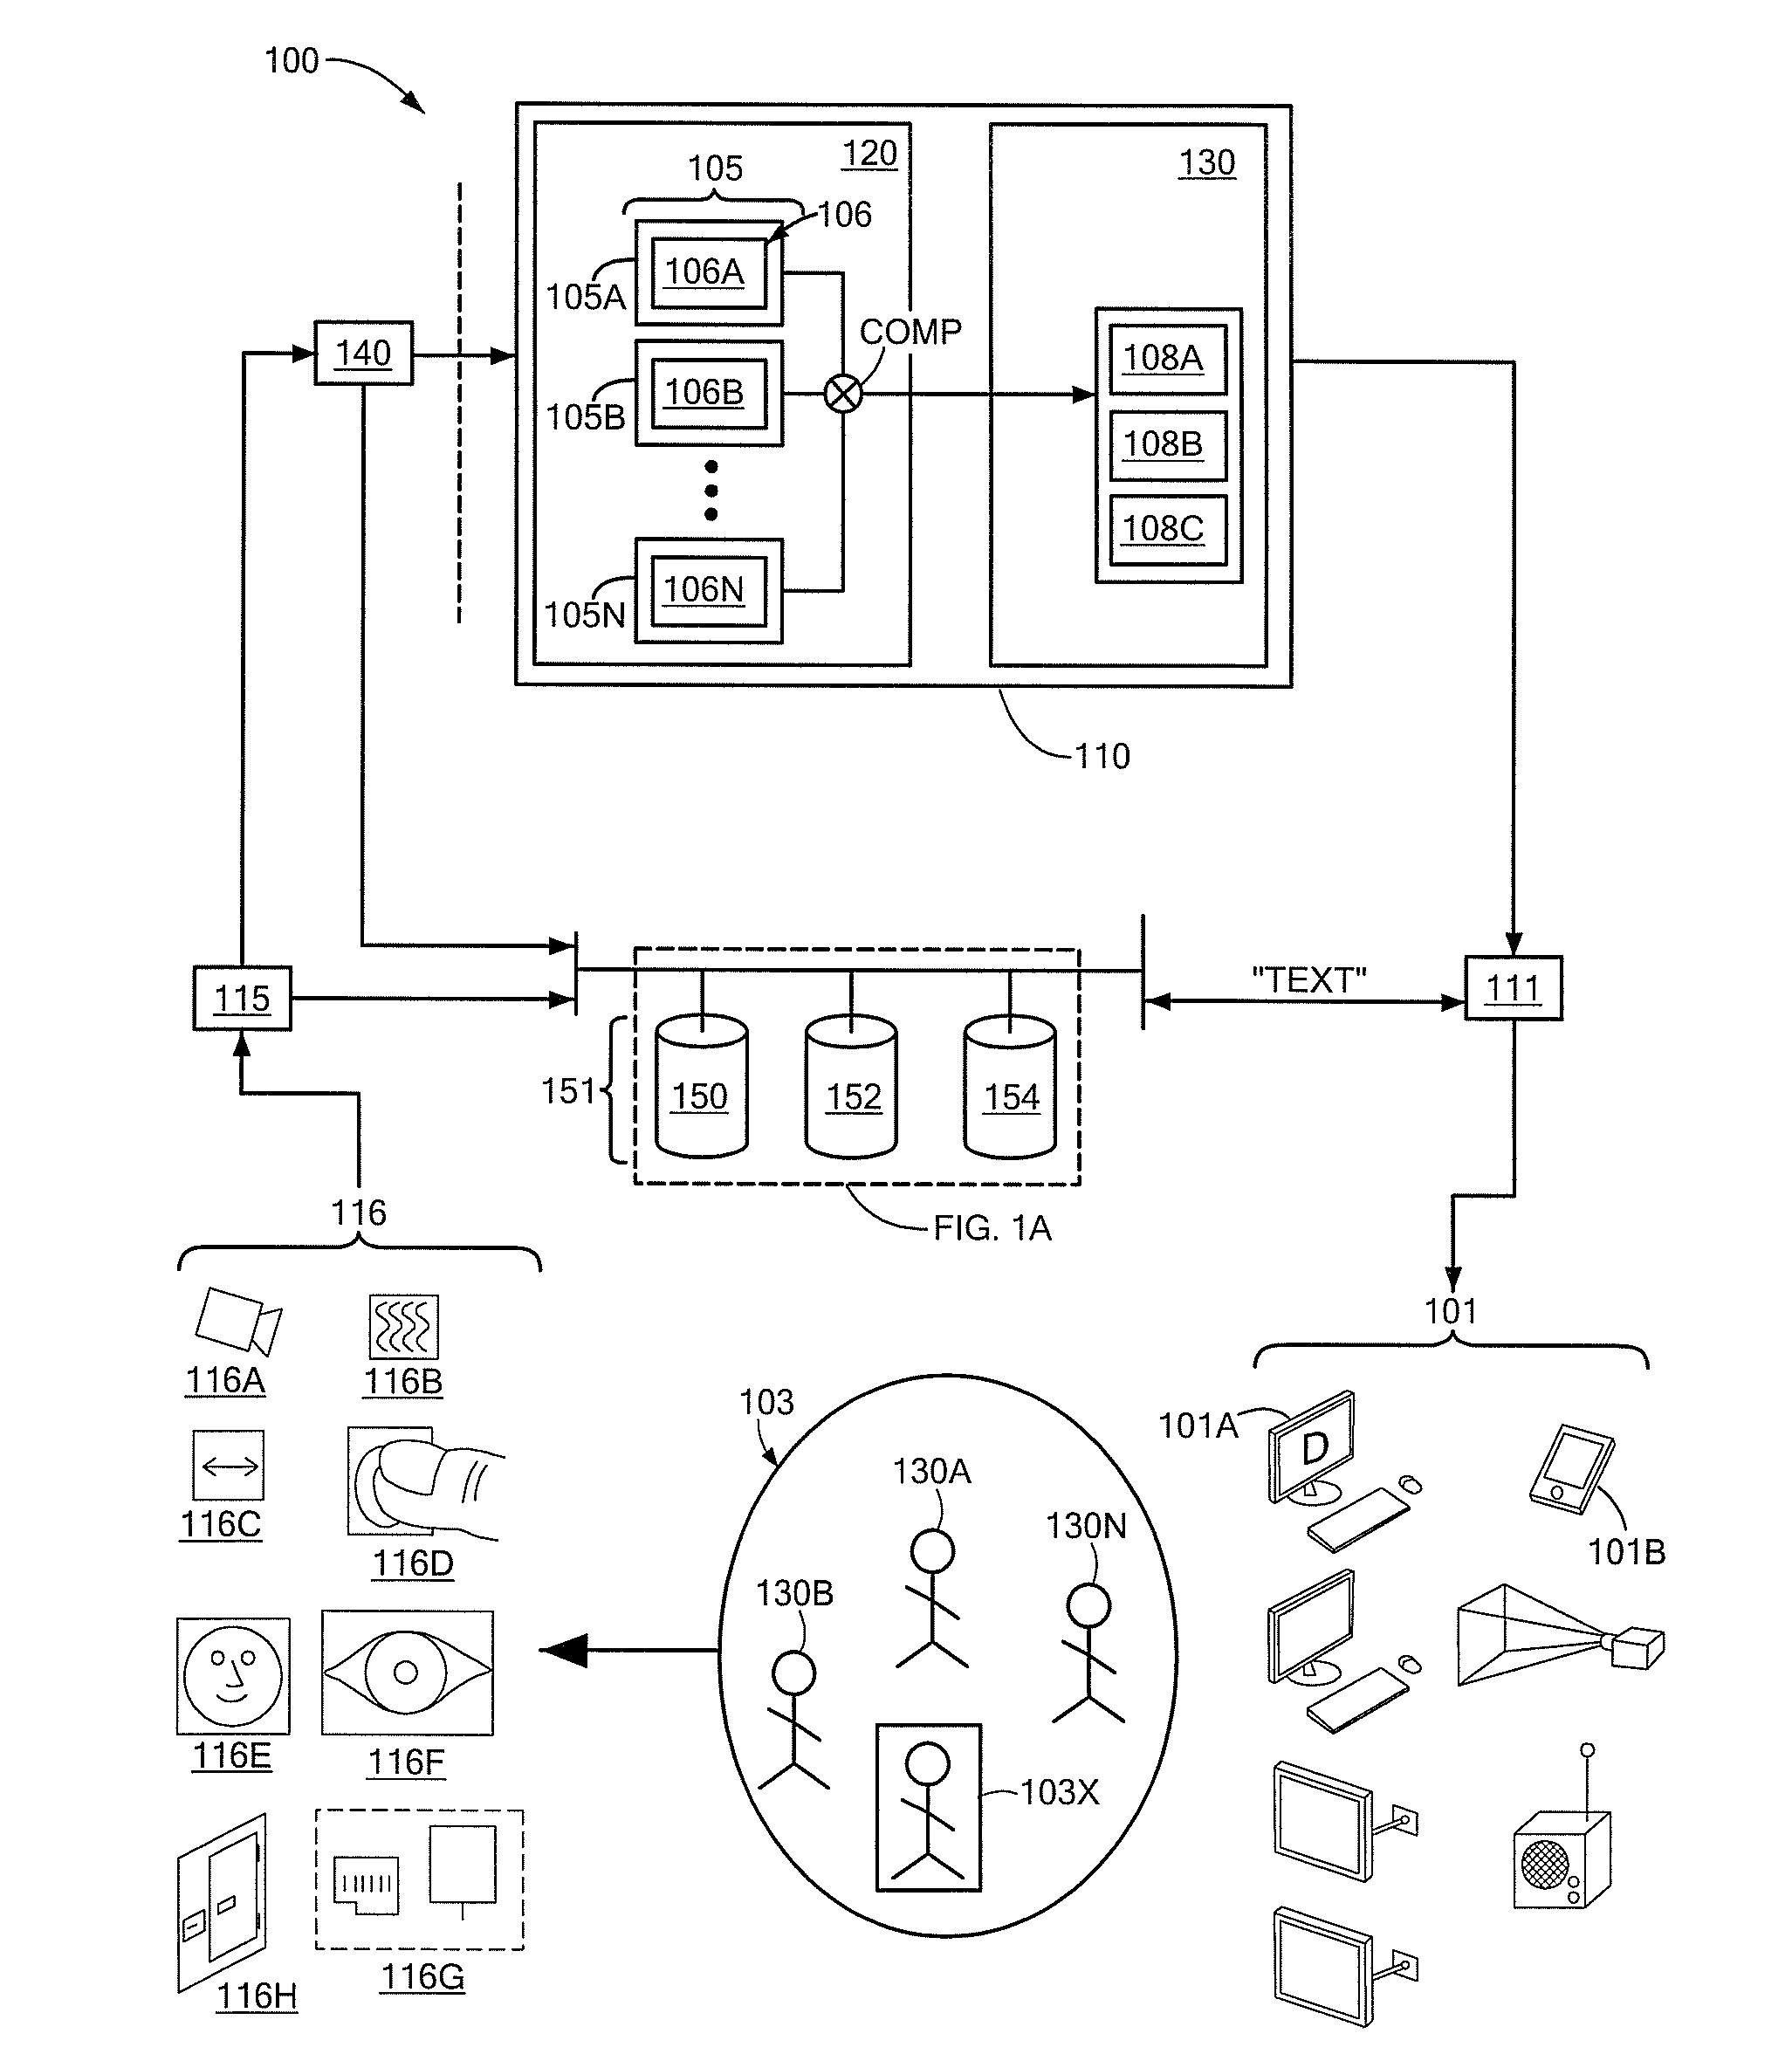 Method and system for controlling data access on user interfaces